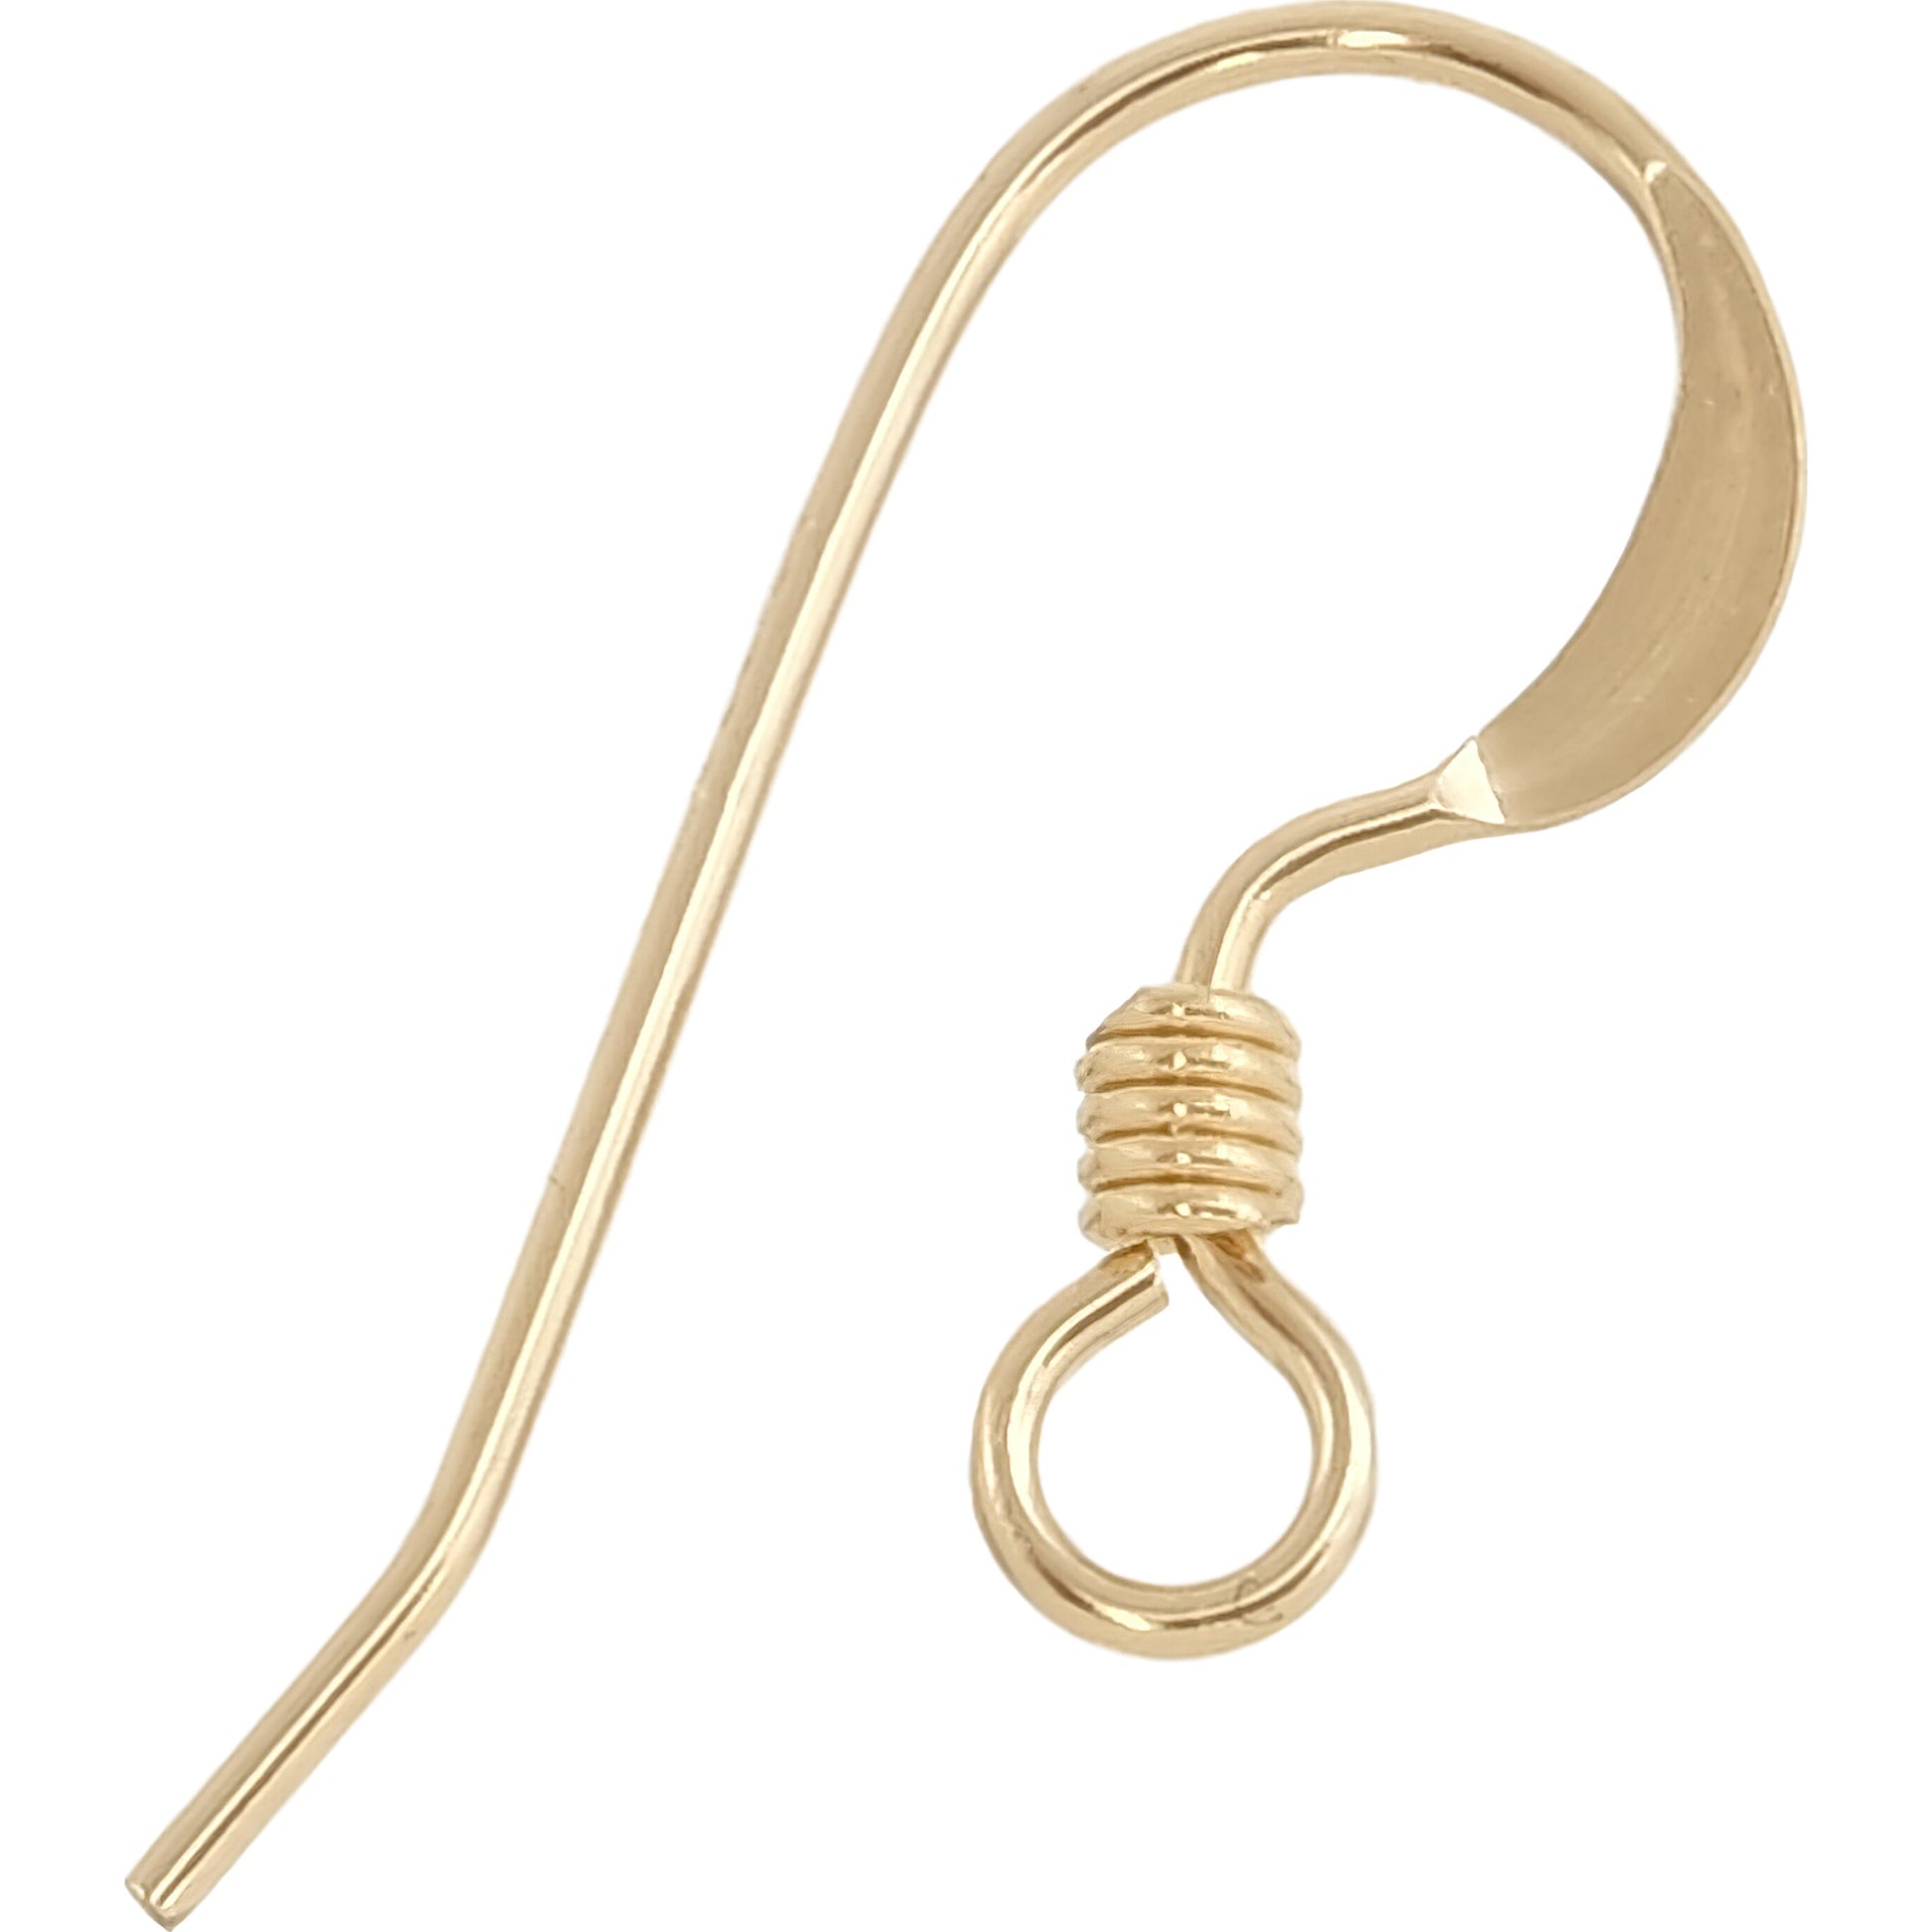 14K Gold Filled French Wire Earring Hooks (10), Adult Unisex, Grey Type